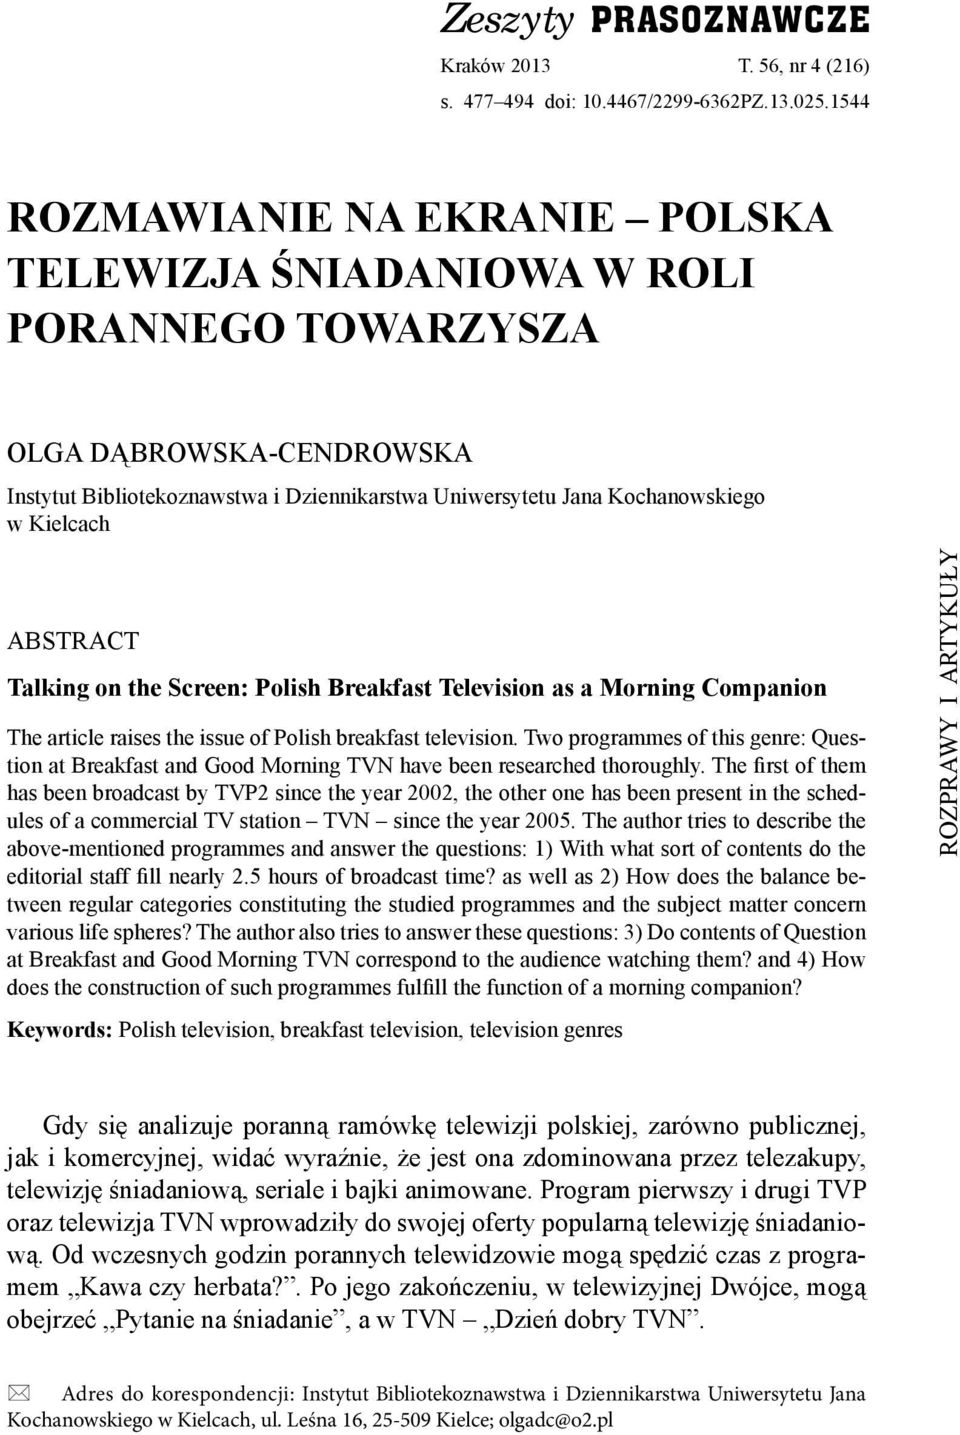 ABSTRACT Talking on the Screen: Polish Breakfast Television as a Morning Companion The article raises the issue of Polish breakfast television.